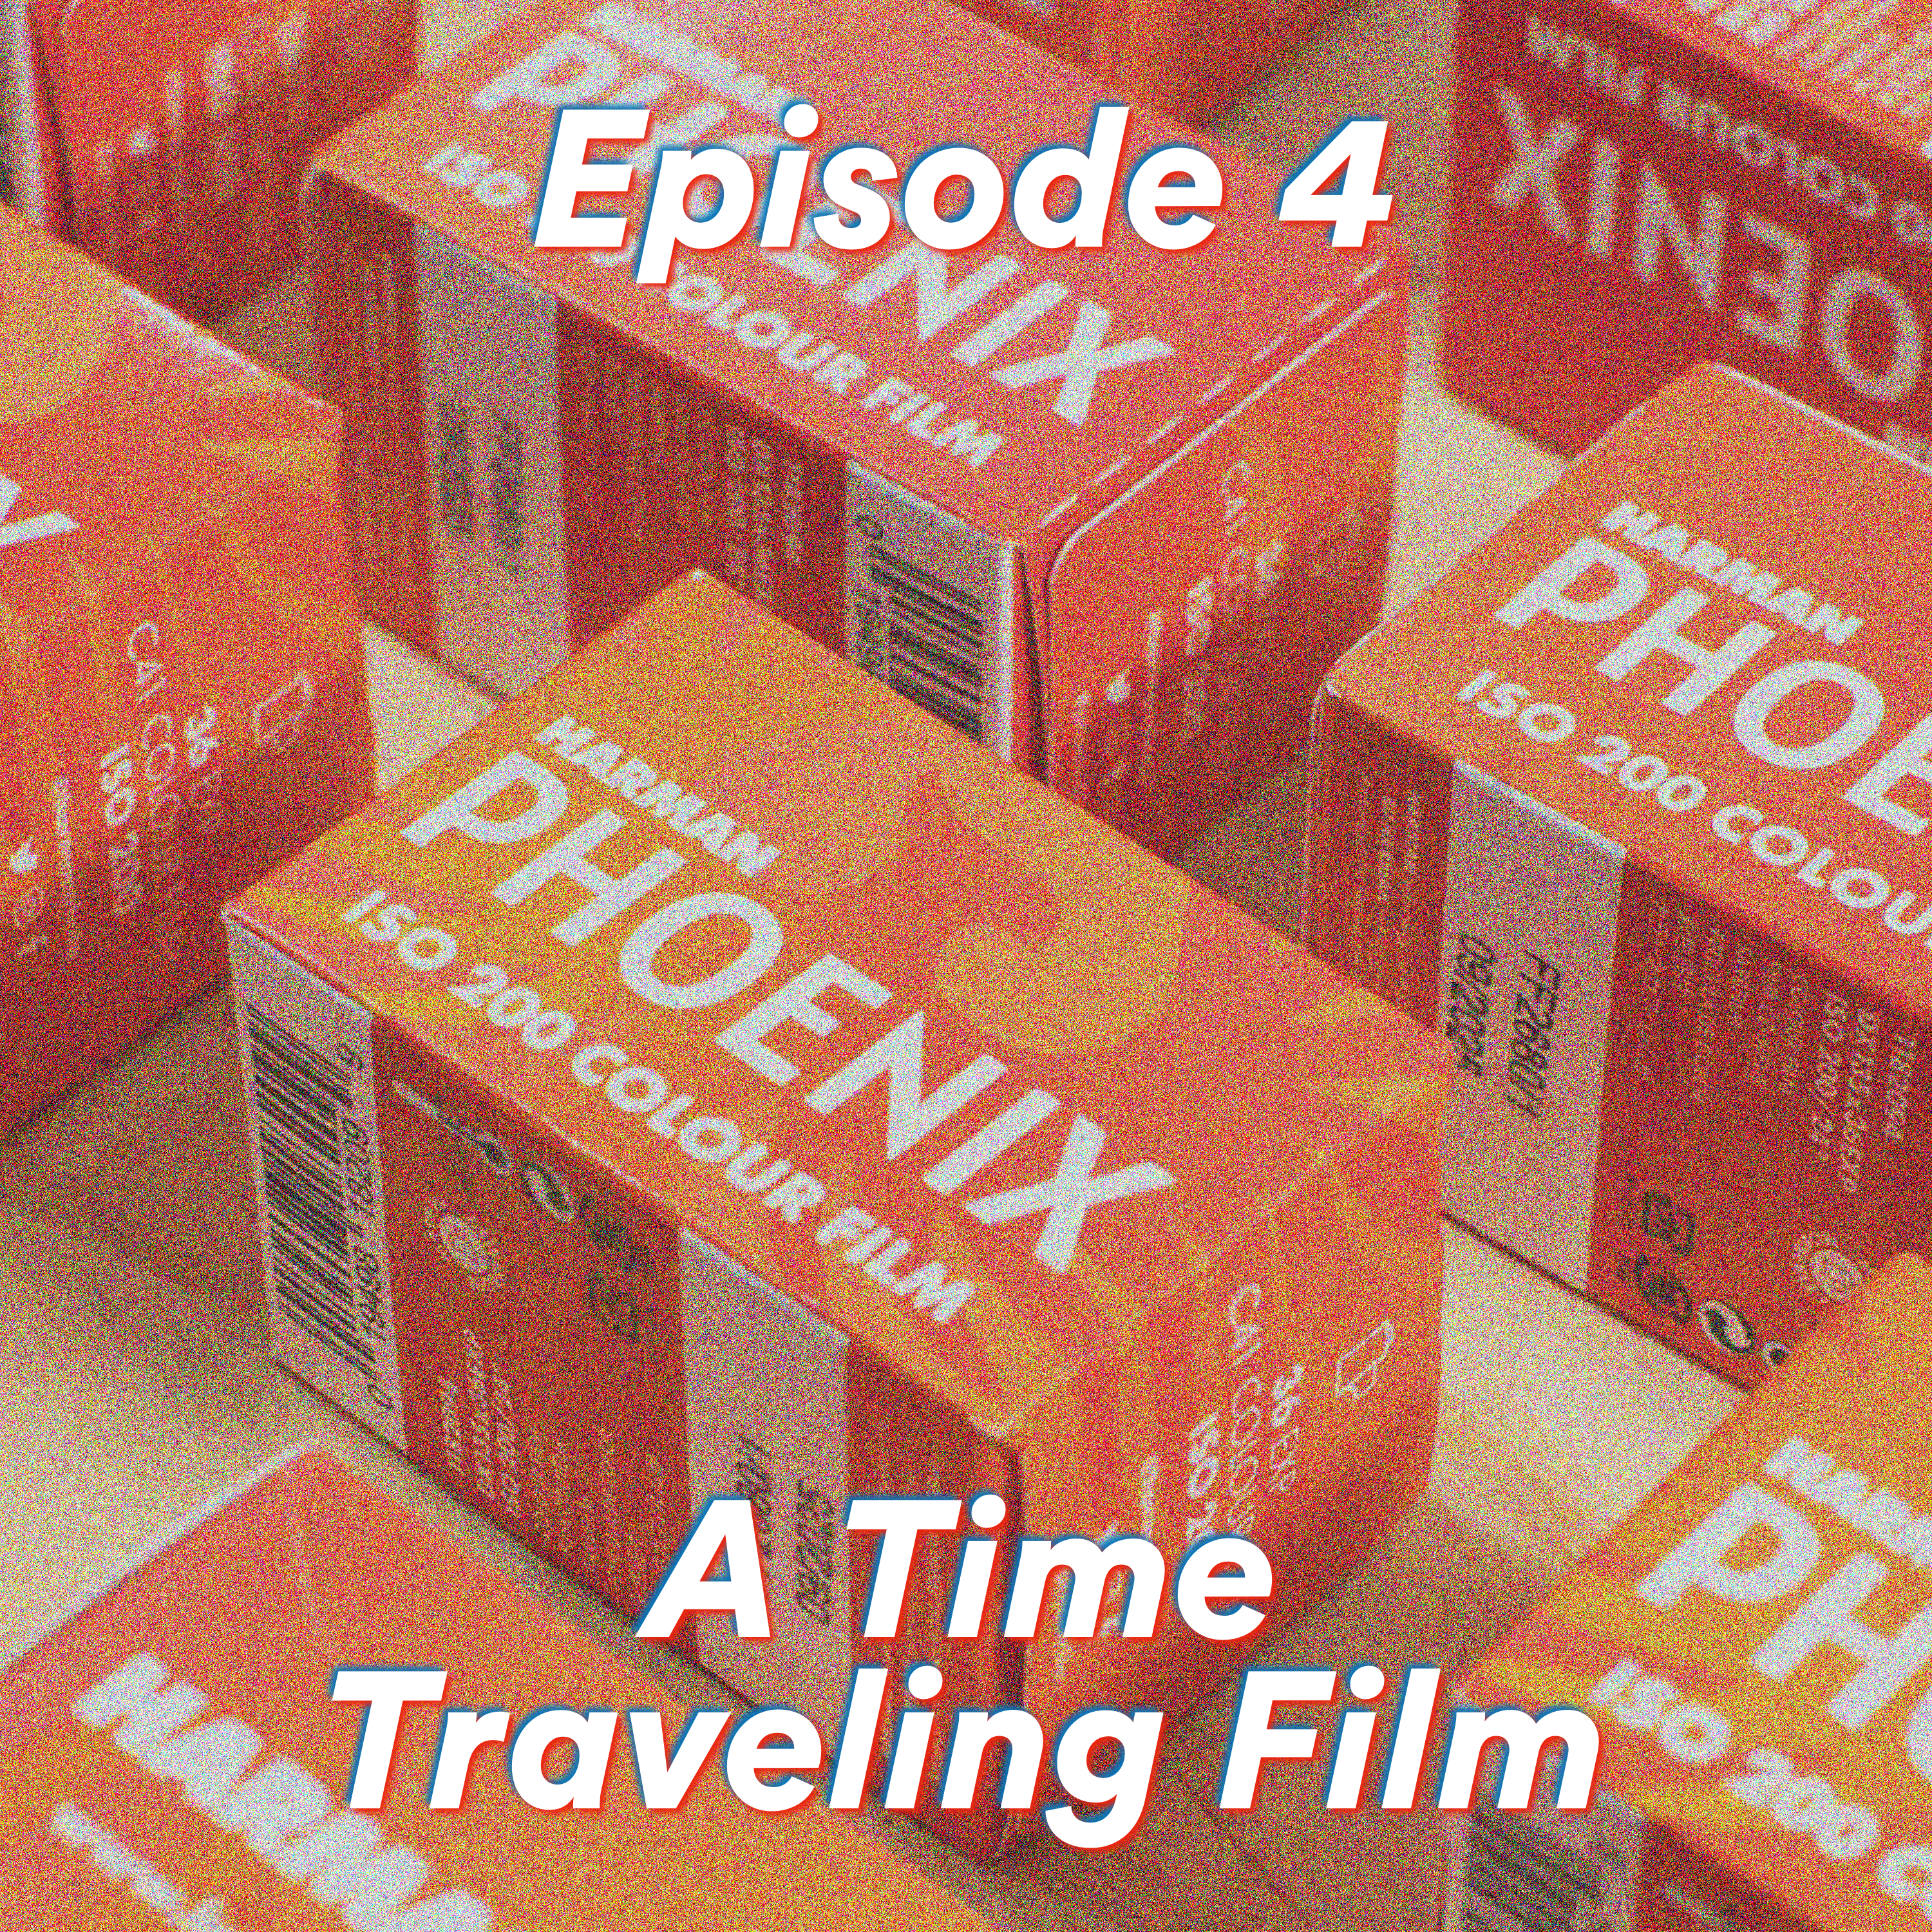 Episode 4: A Time Traveling Film